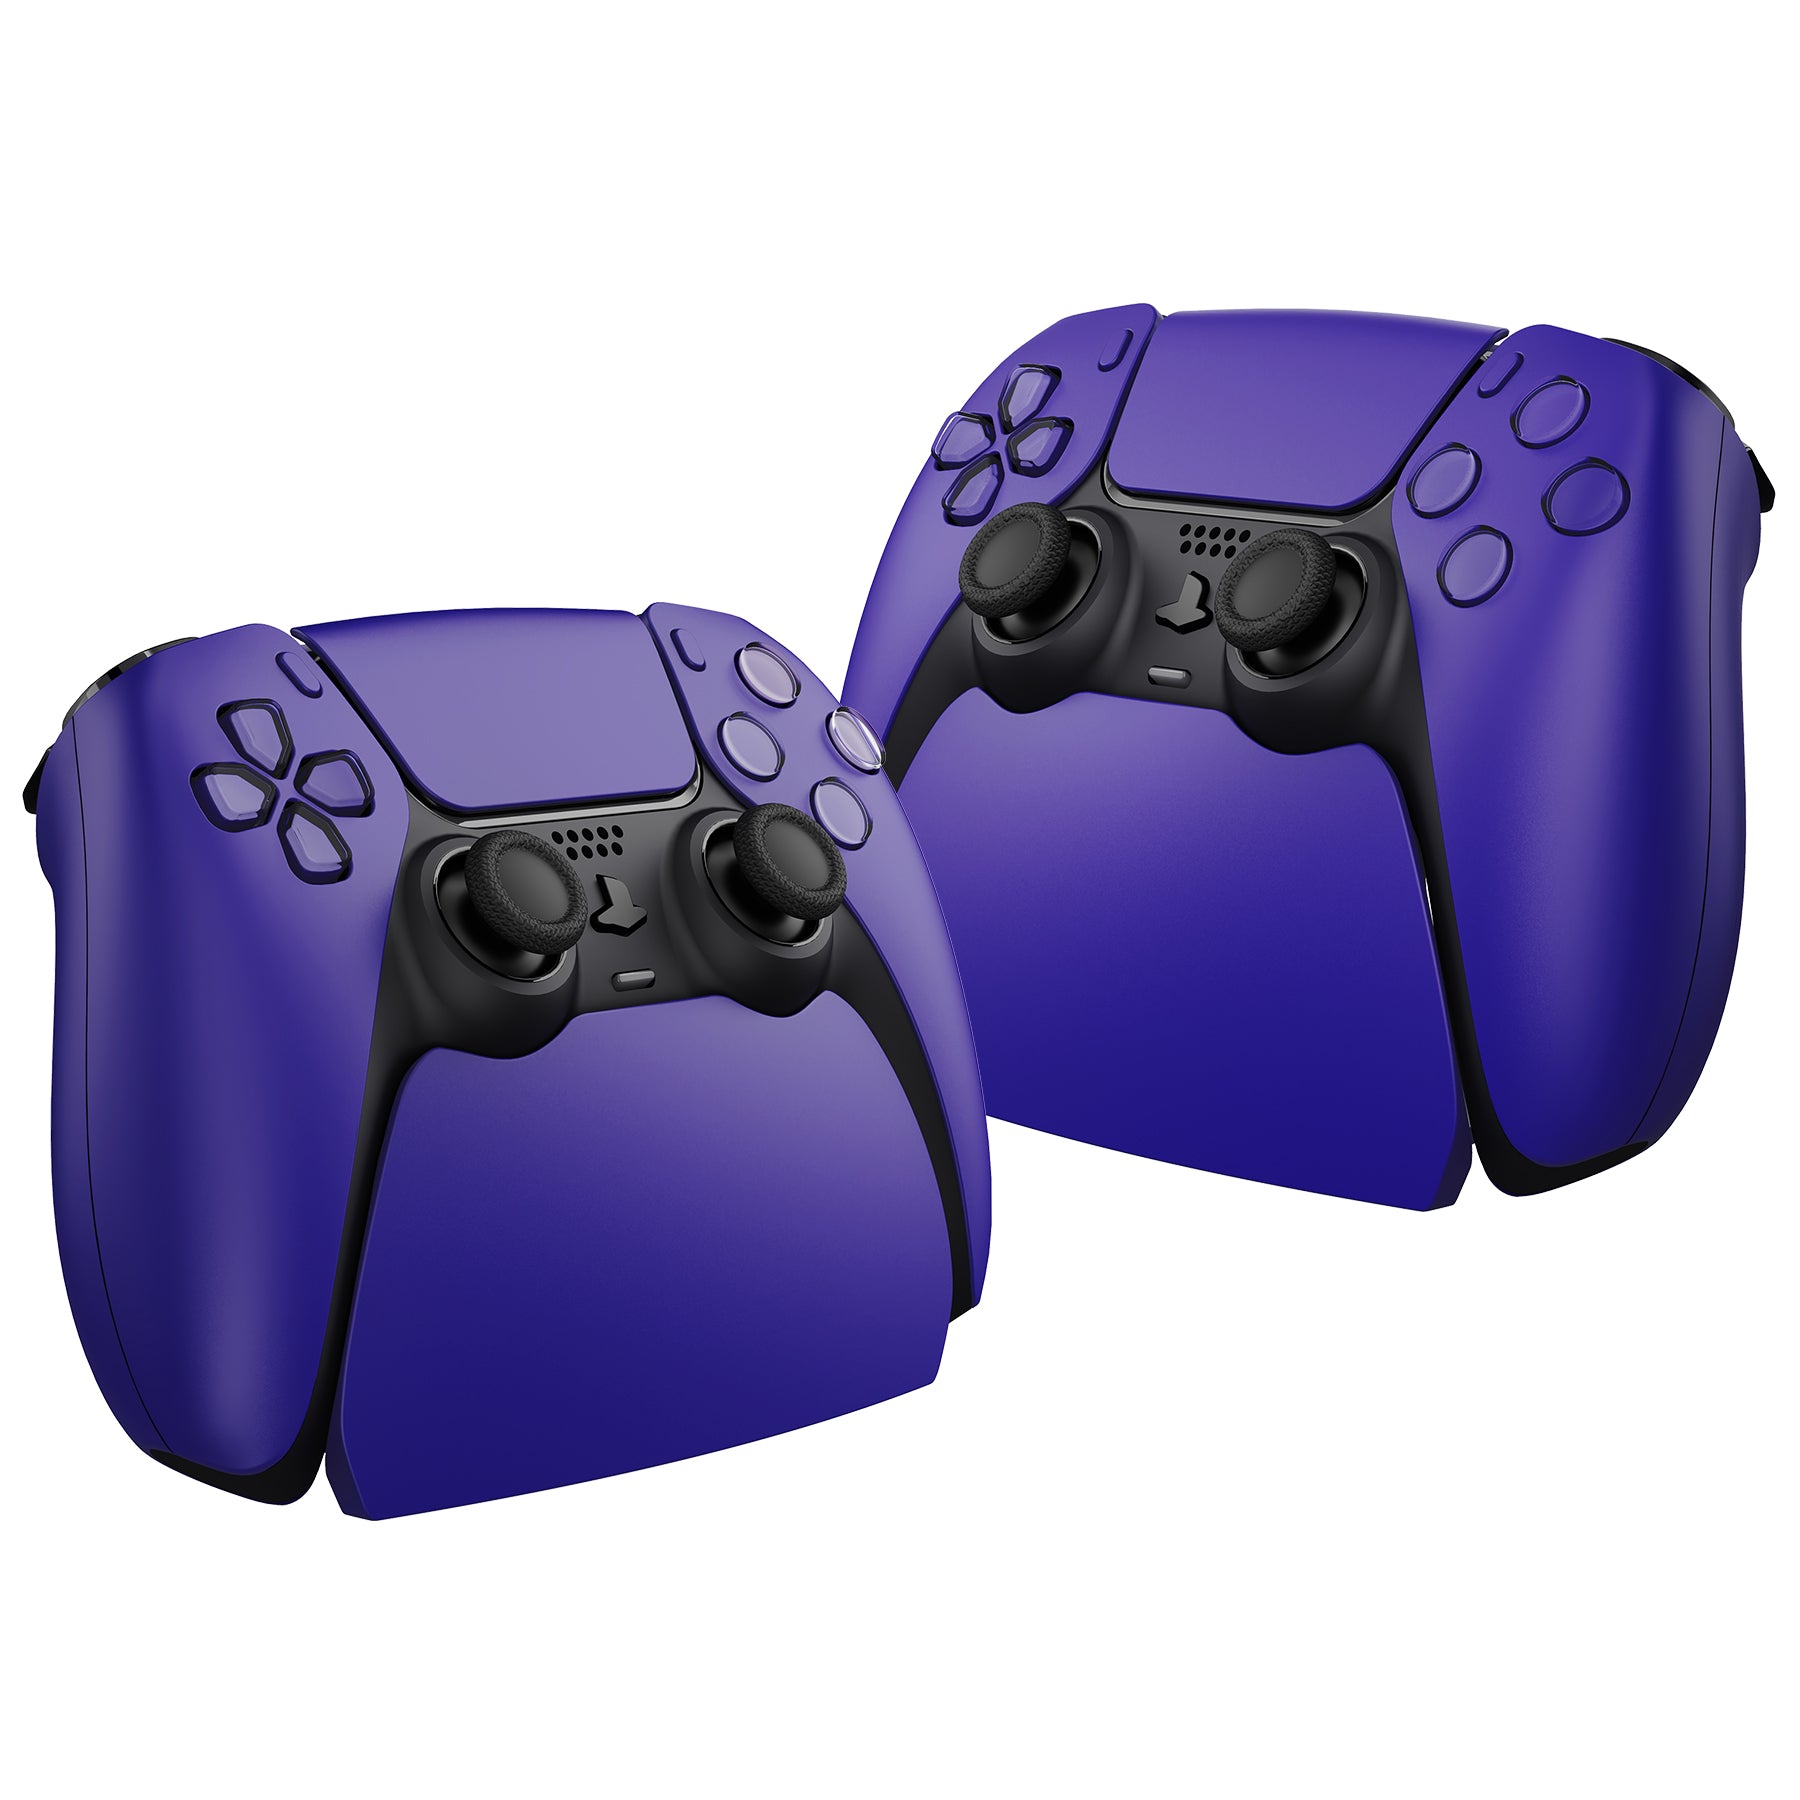 PlayVital Galactic Purple Controller Display Stand for PS5, Gamepad Accessories Desk Holder for PS5 Controller with Rubber Pads - PFPJ082 PlayVital